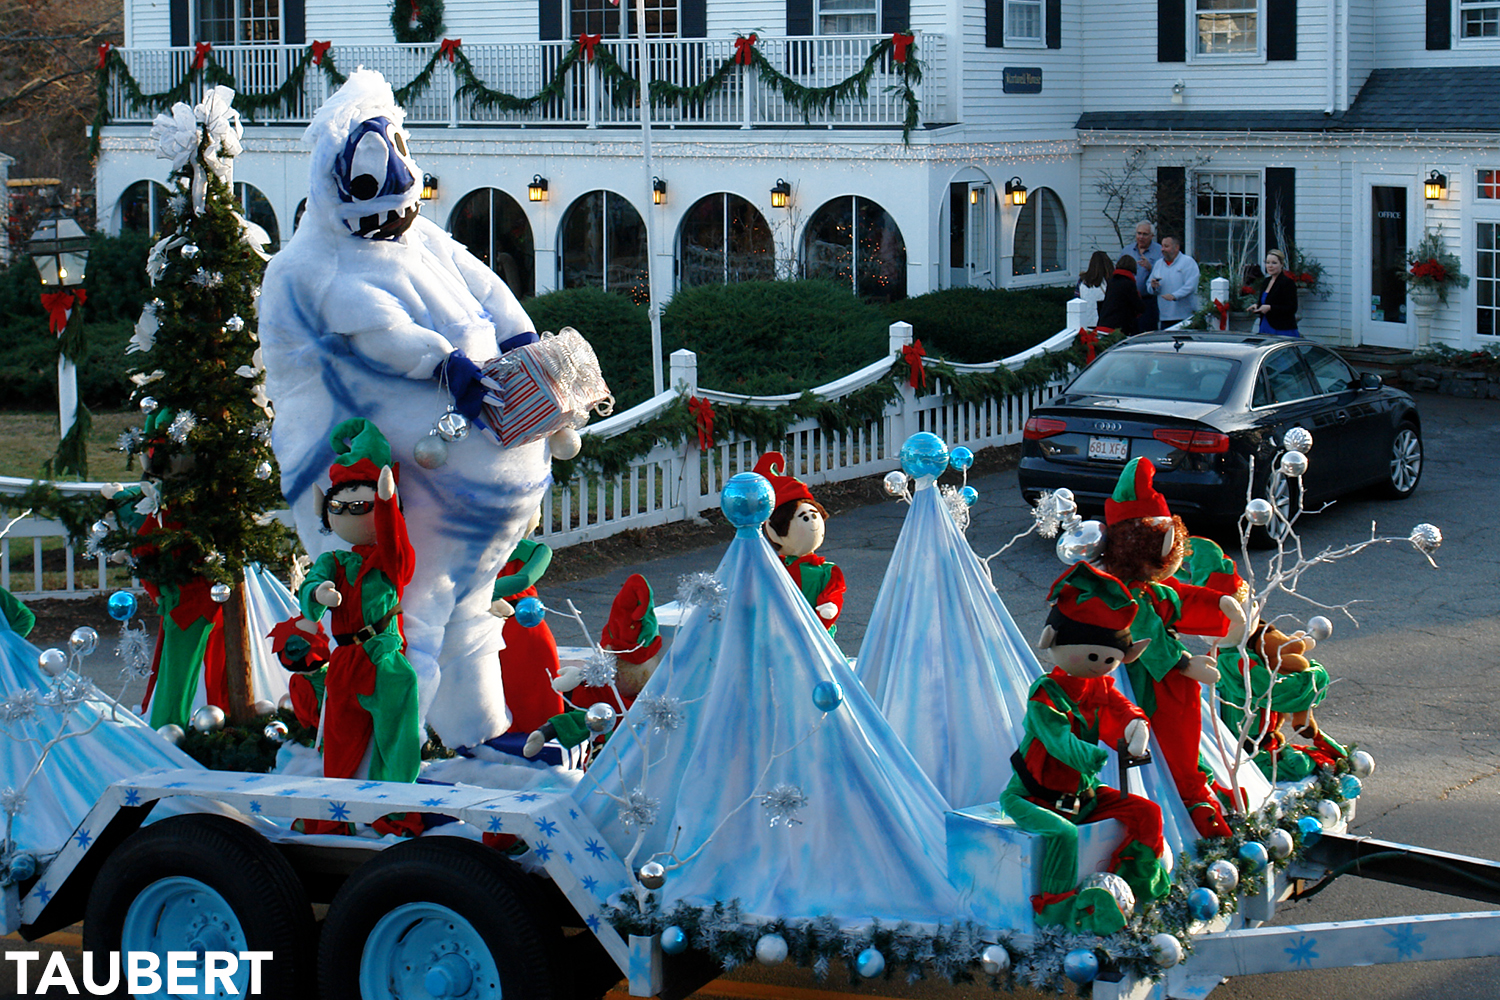 36th Annual Christmas by the Sea Celebration in Ogunquit, Maine 2022